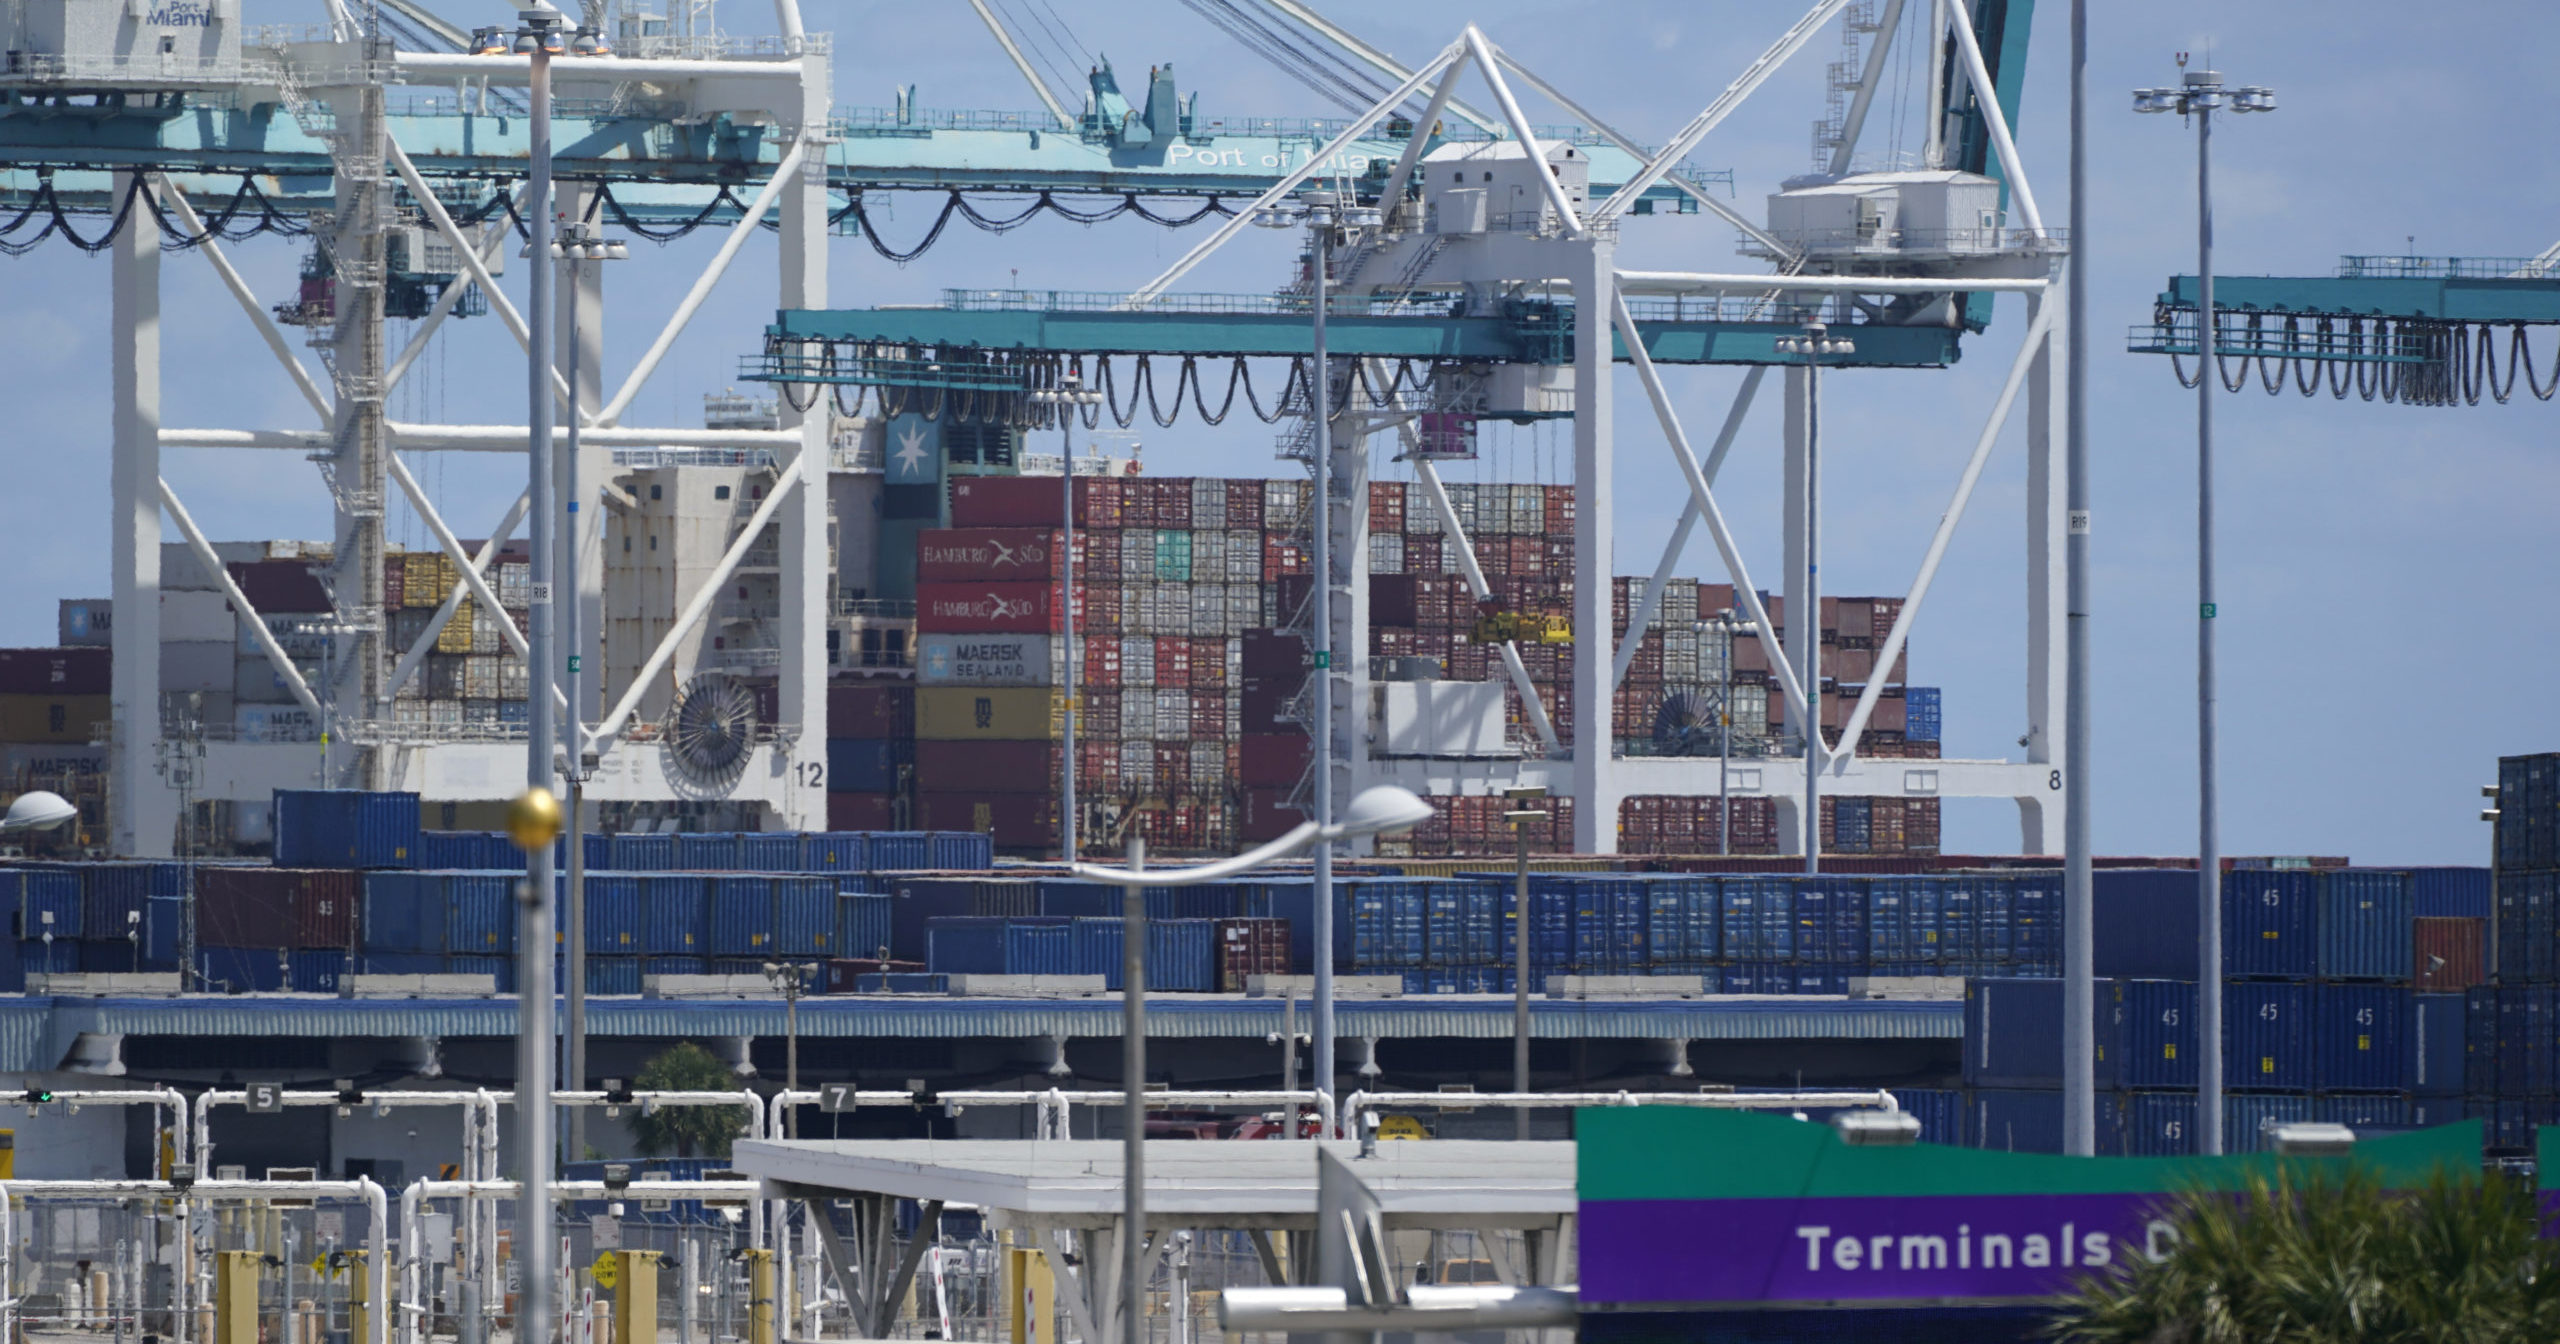 Cargo containers are seen stacked near cranes at Port Miami in Miami on April 9, 2021.